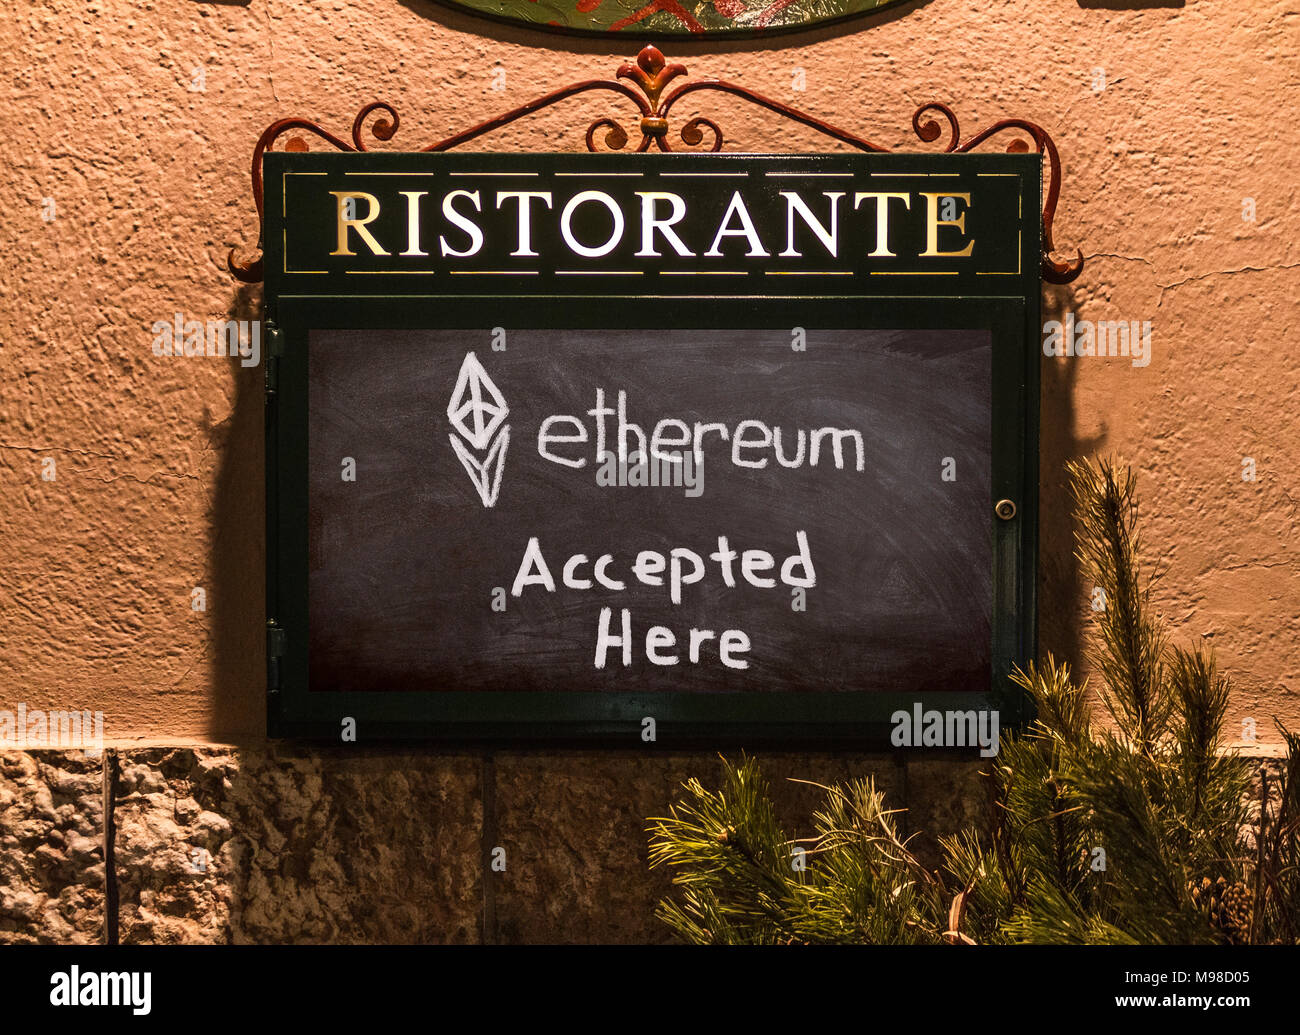 Ethereum Accepted Notice Restaurant Business Stock Photo